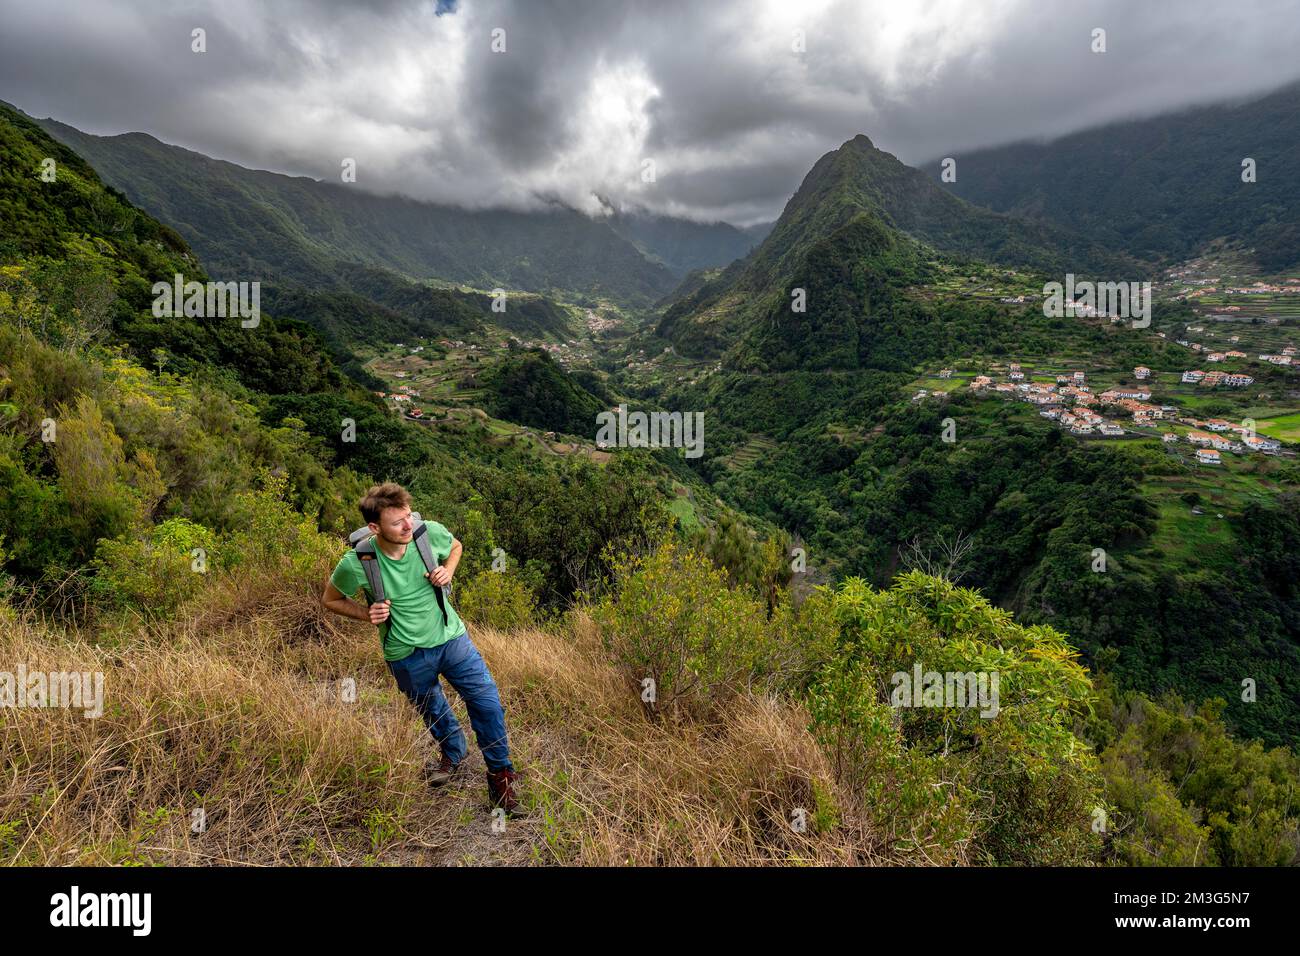 Hikers at Pico do Alto, panorama, view of densely overgrown cloud-covered mountains and the village of Boaventura, Madeira, Portugal Stock Photo